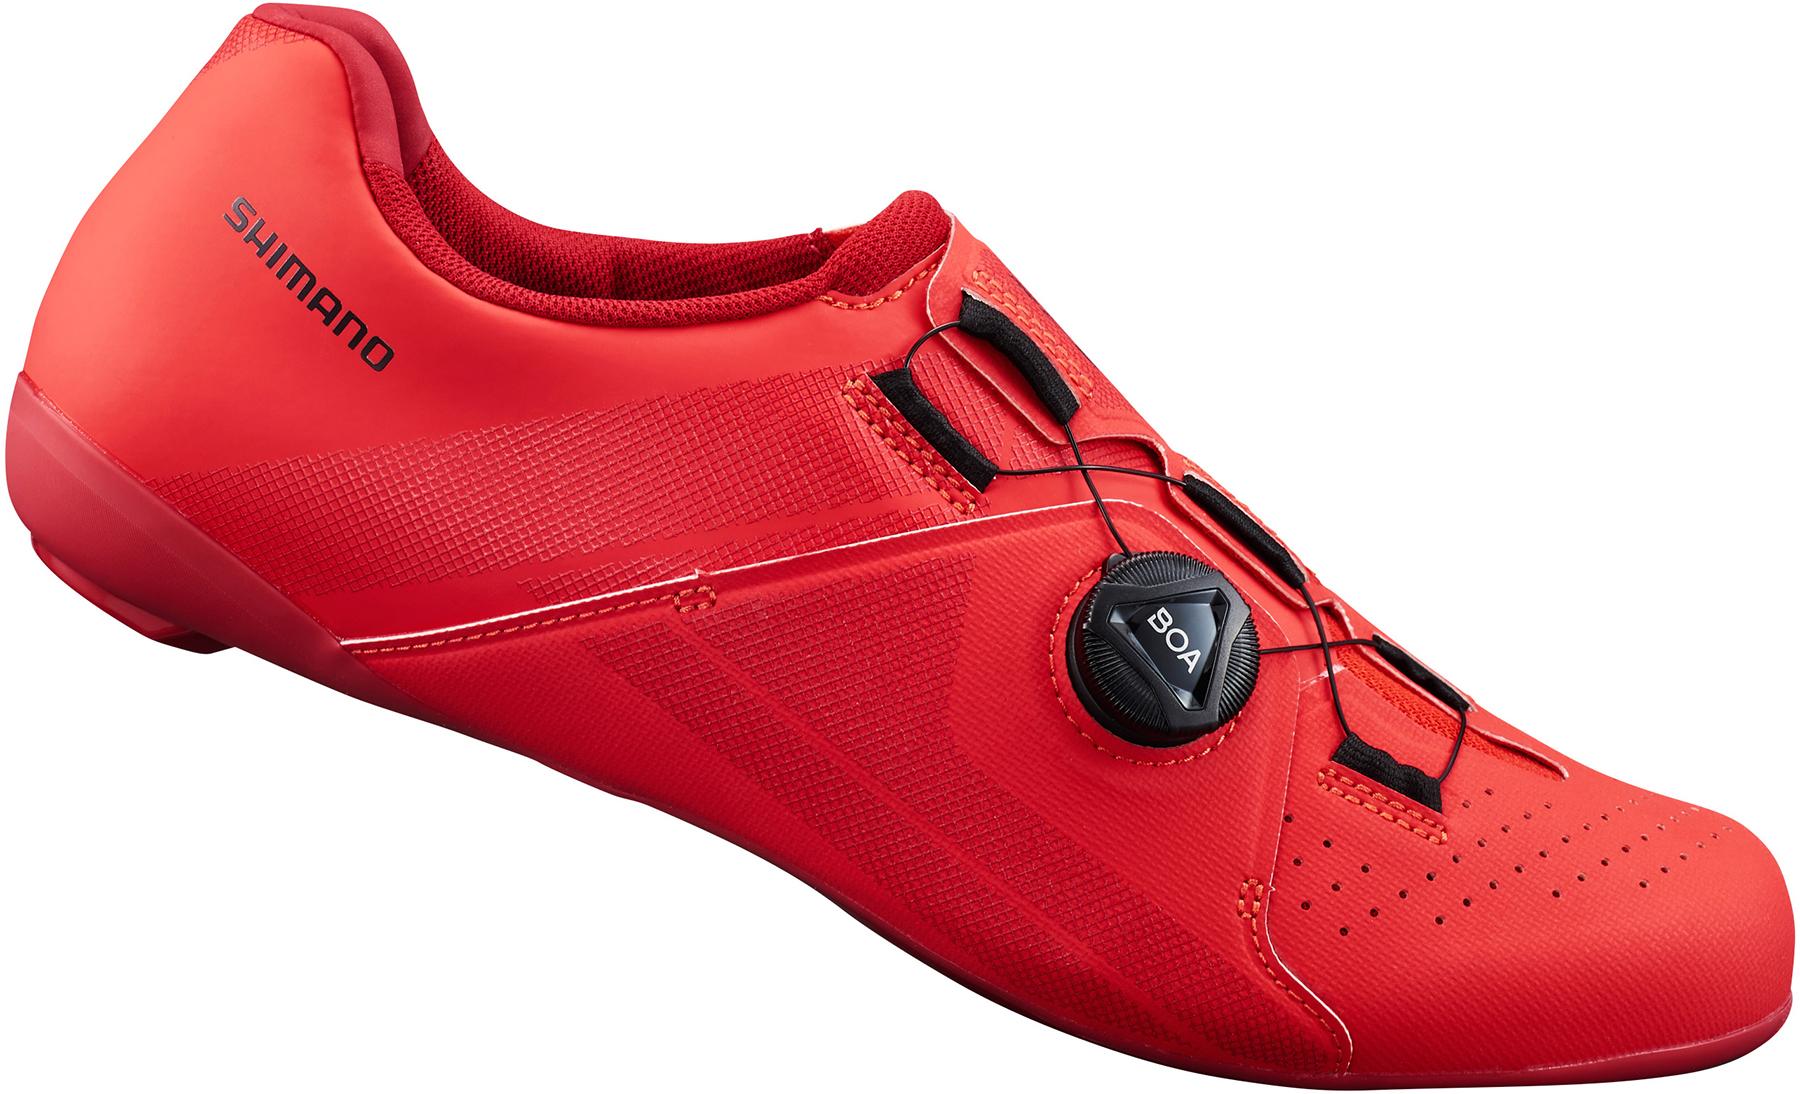 Shimano Rc3 Road Shoes - Red